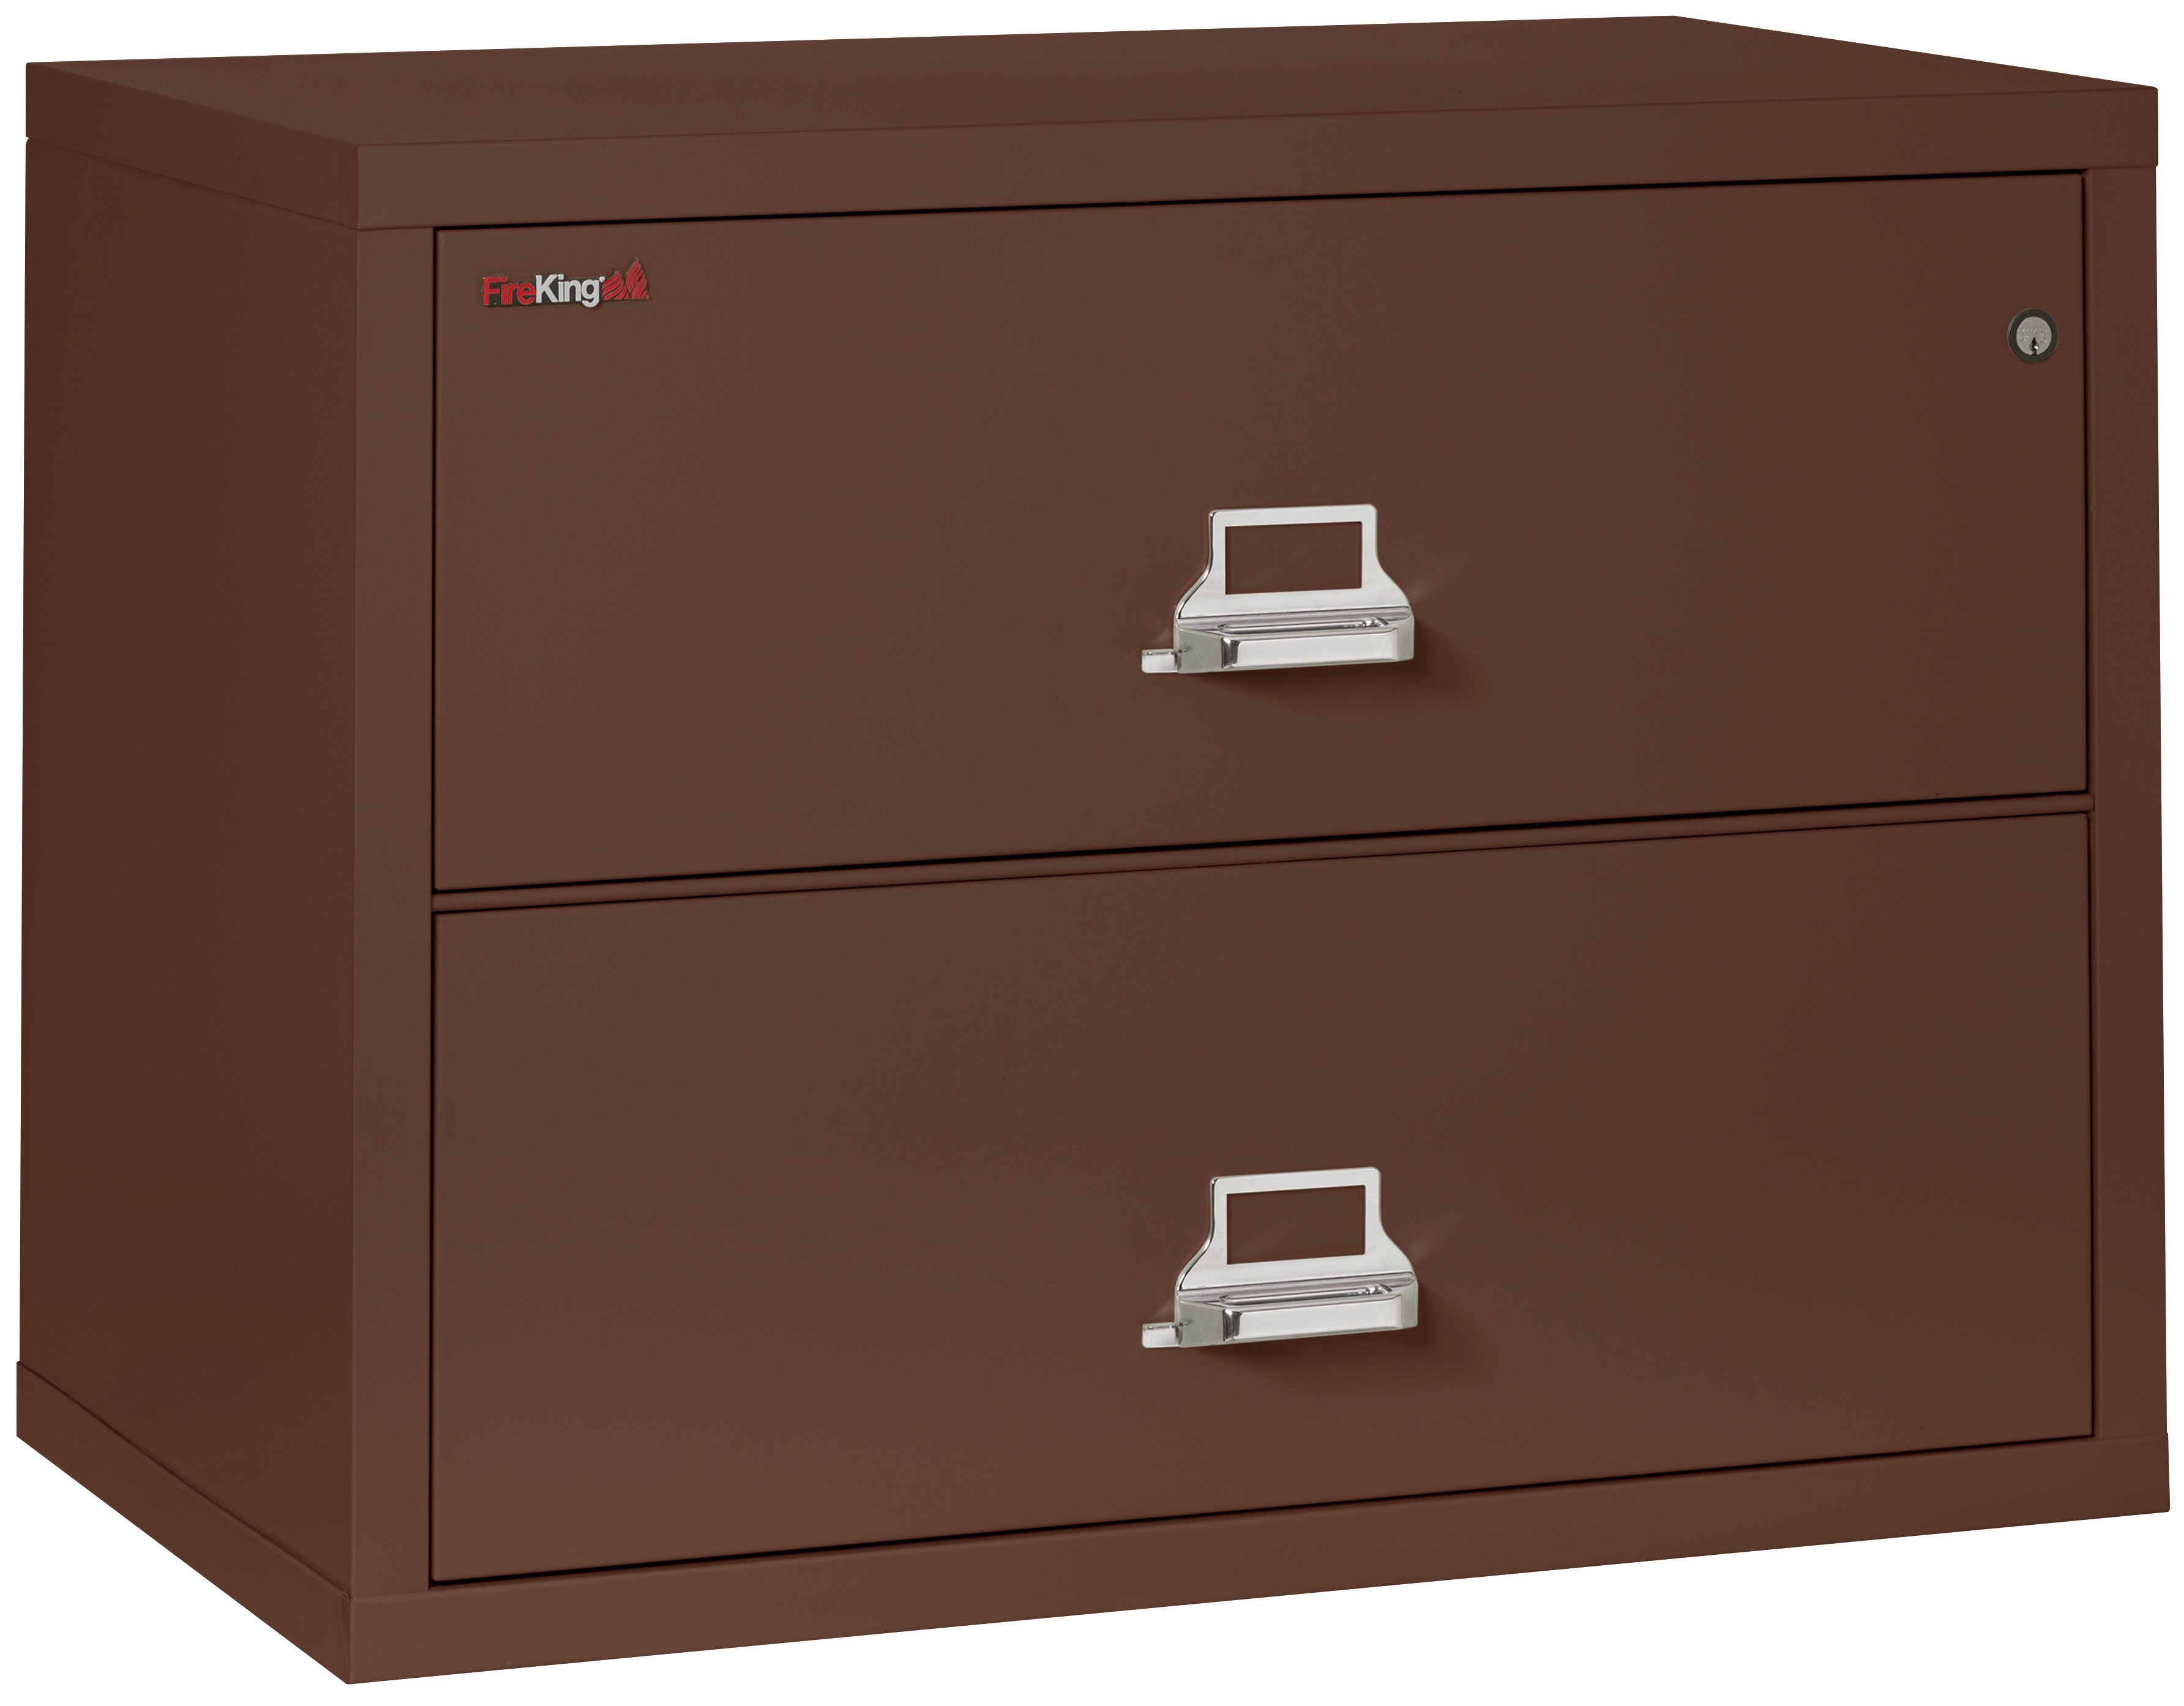 Fireking 2 Drawer 38" wide Classic Lateral fireproof File Cabinet-Brown - image 1 of 1